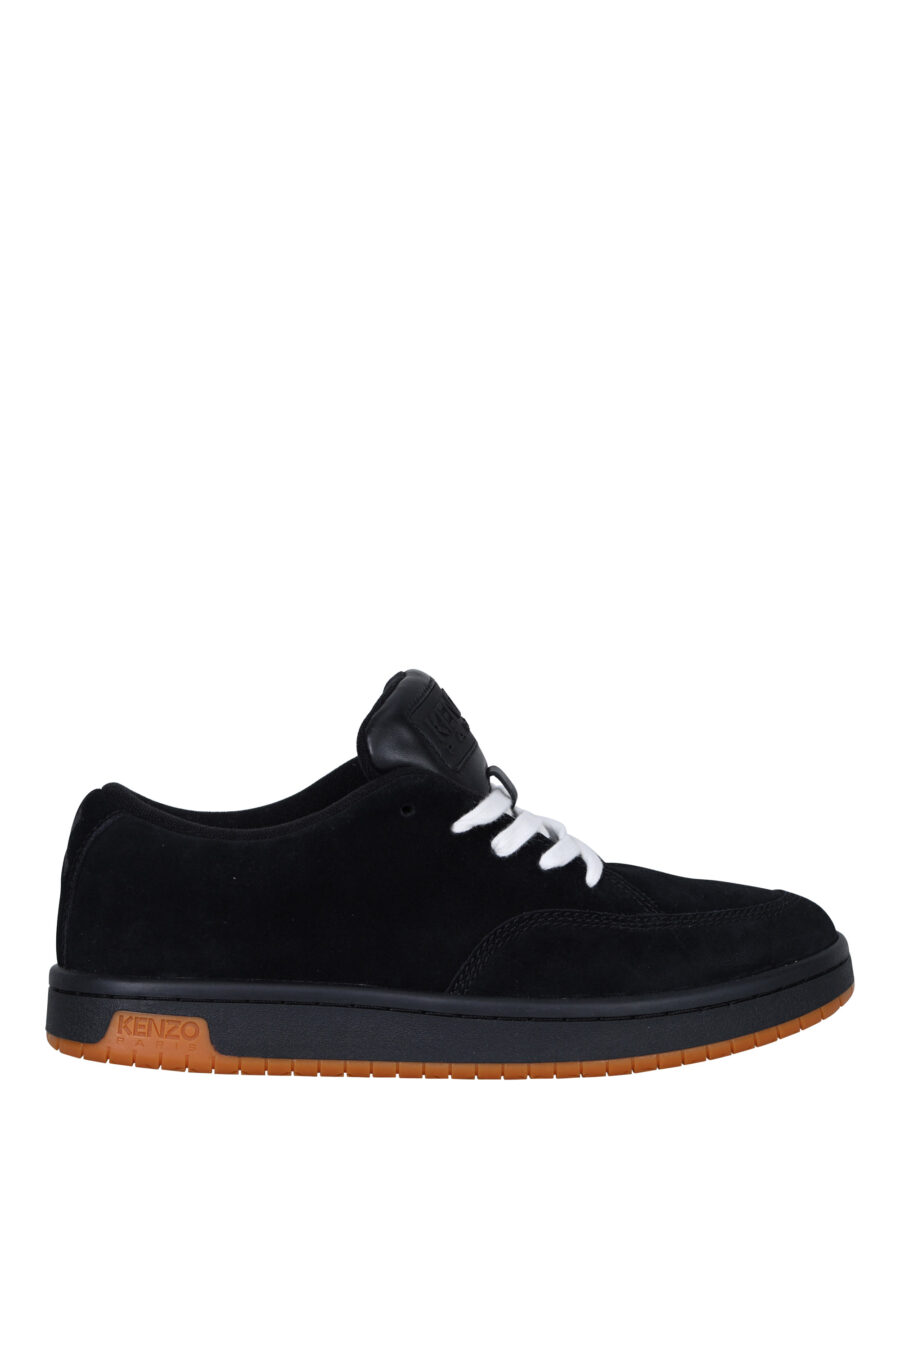 Black trainers "kenzo dome" with minilogo and brown sole - 3612230549111